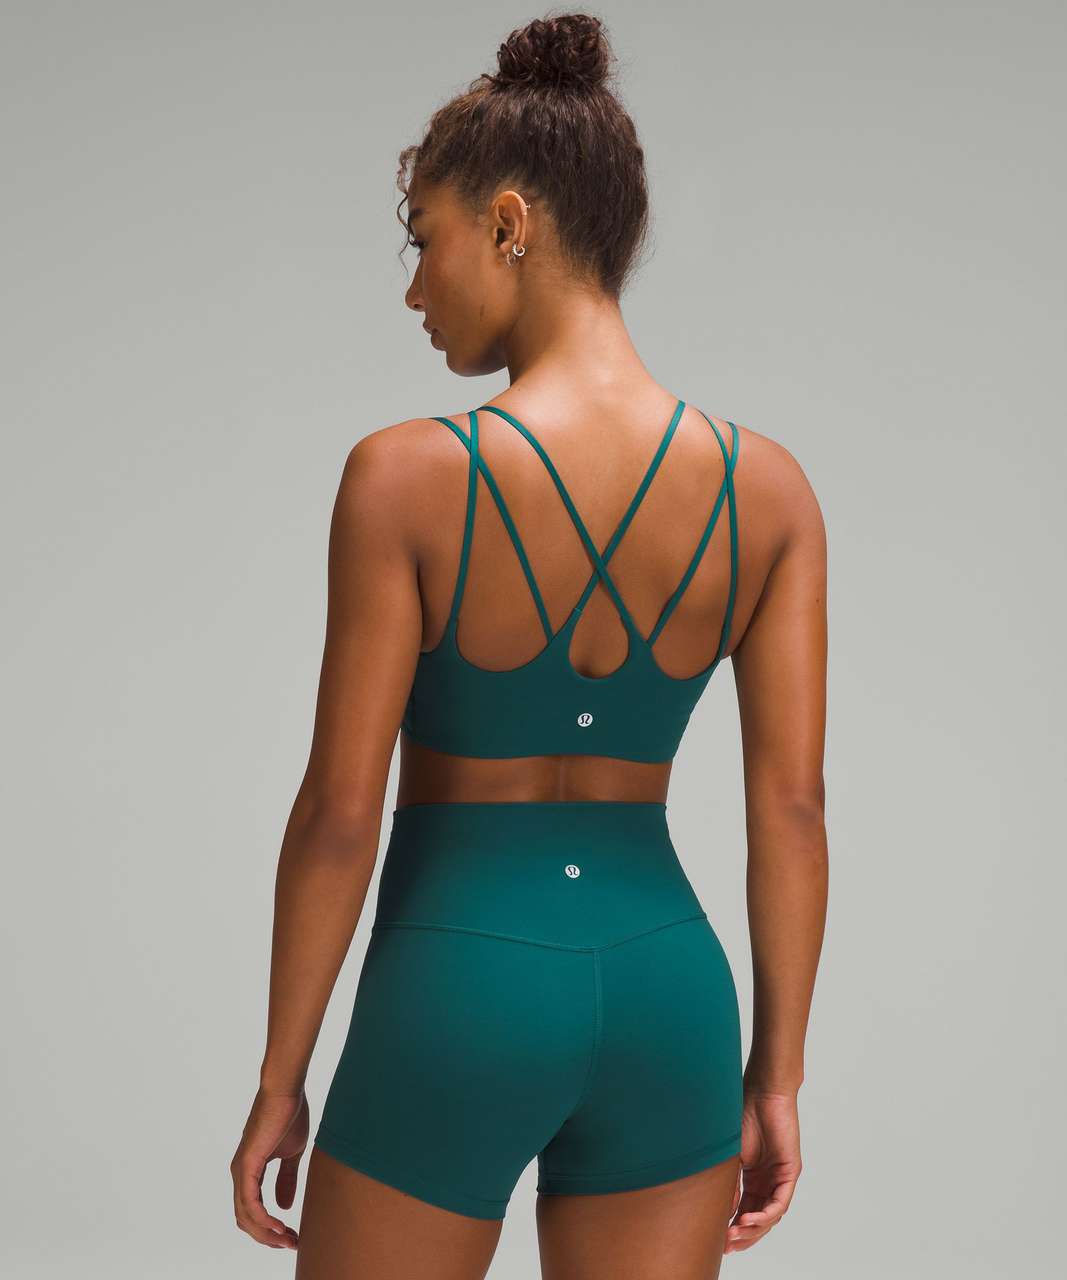 Lululemon Nulu Strappy Yoga Bra *Light Support, A/B Cup - Storm Teal